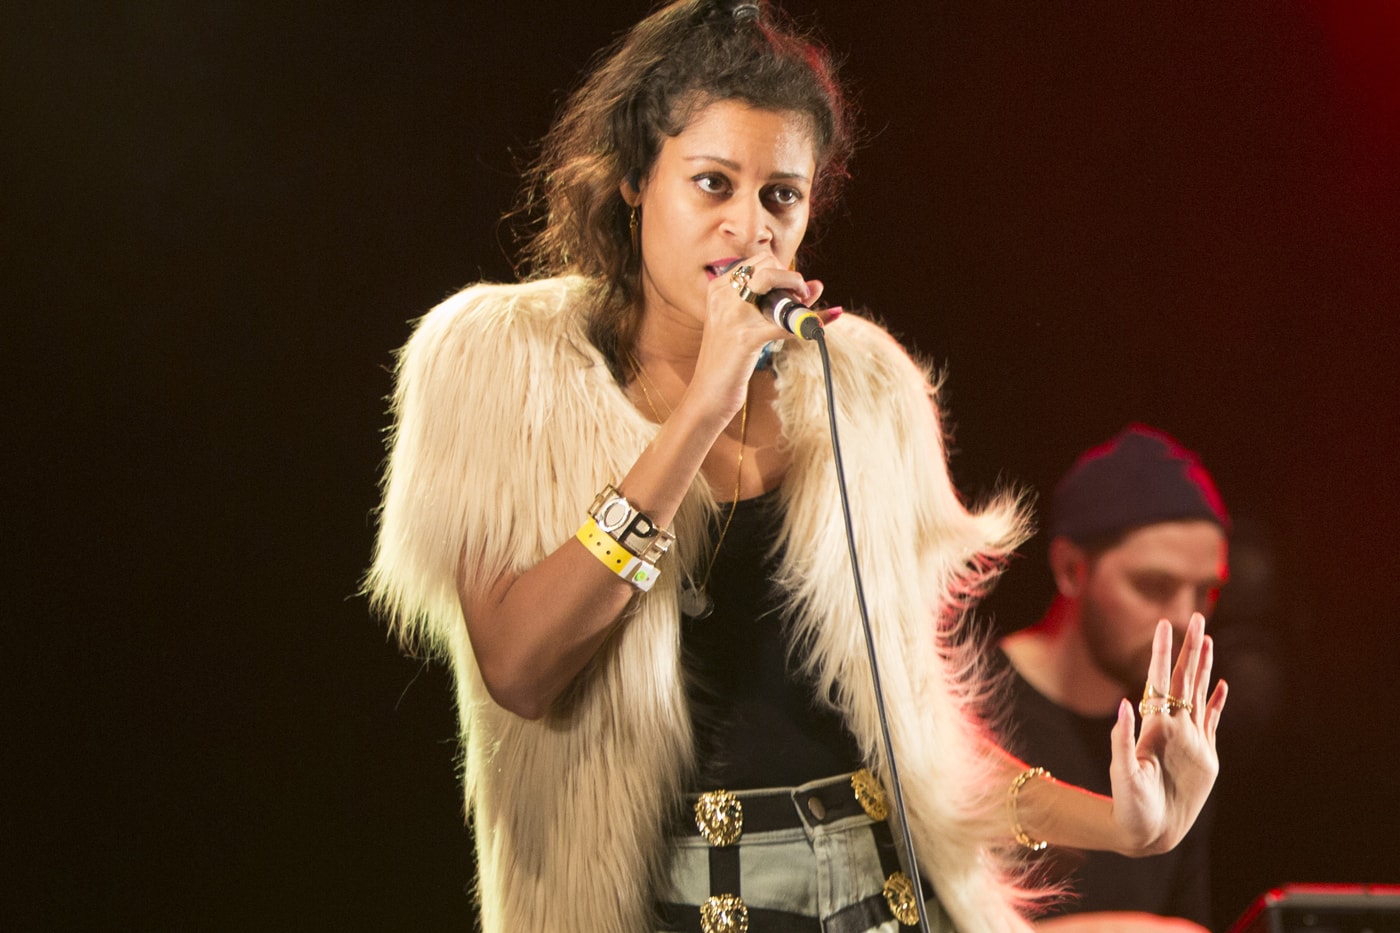 AlunaGeorge and Popcaan Release "I'm In Control" Video